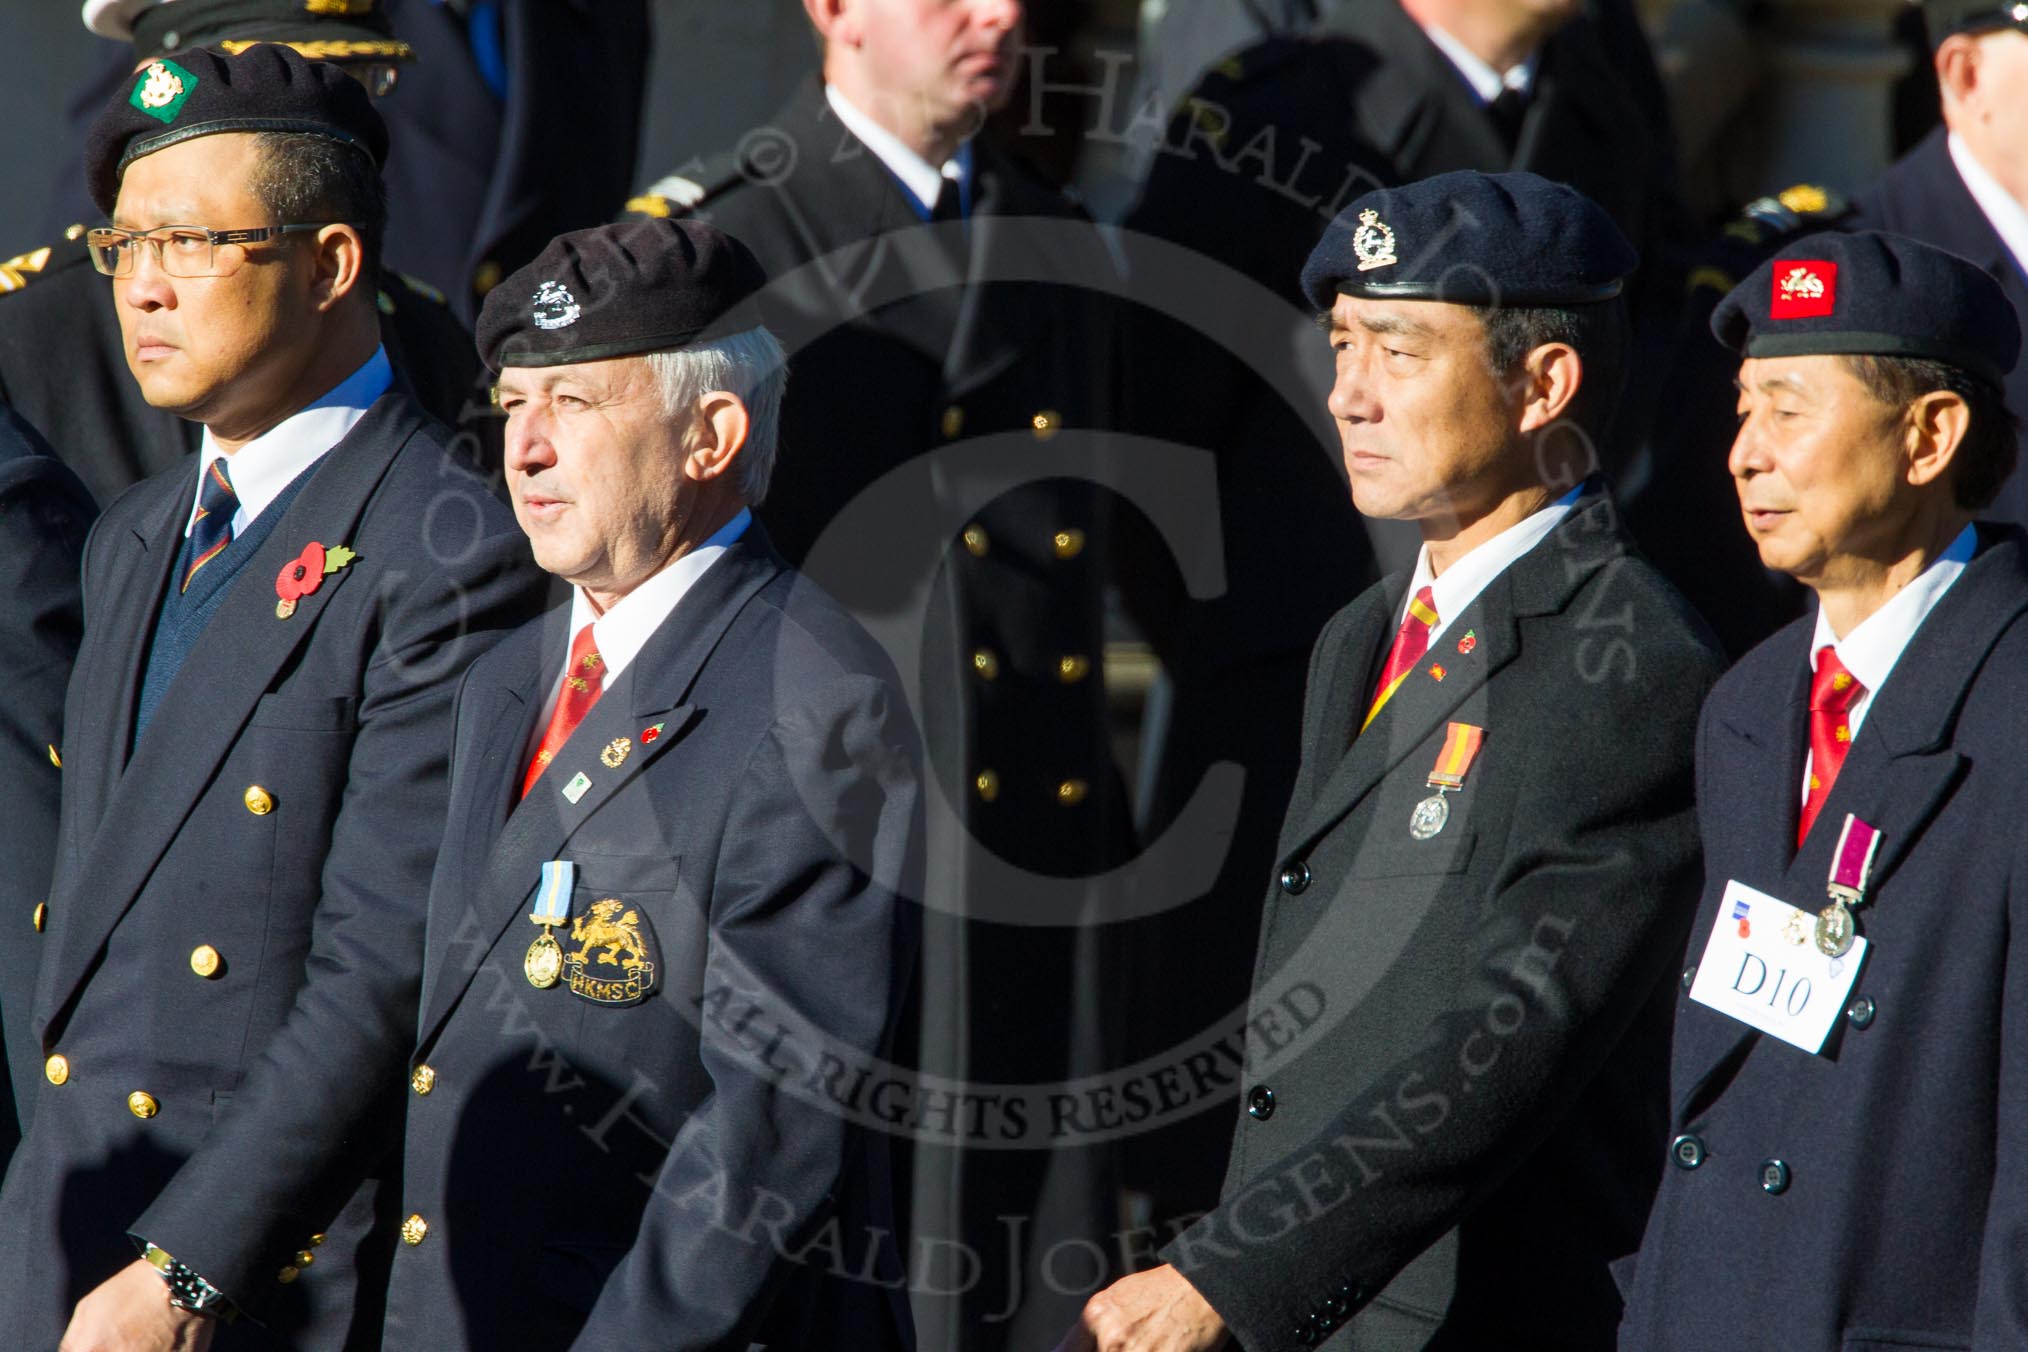 Remembrance Sunday Cenotaph March Past 2013: D10 - Hong Kong Military Service Corps..
Press stand opposite the Foreign Office building, Whitehall, London SW1,
London,
Greater London,
United Kingdom,
on 10 November 2013 at 11:39, image #84